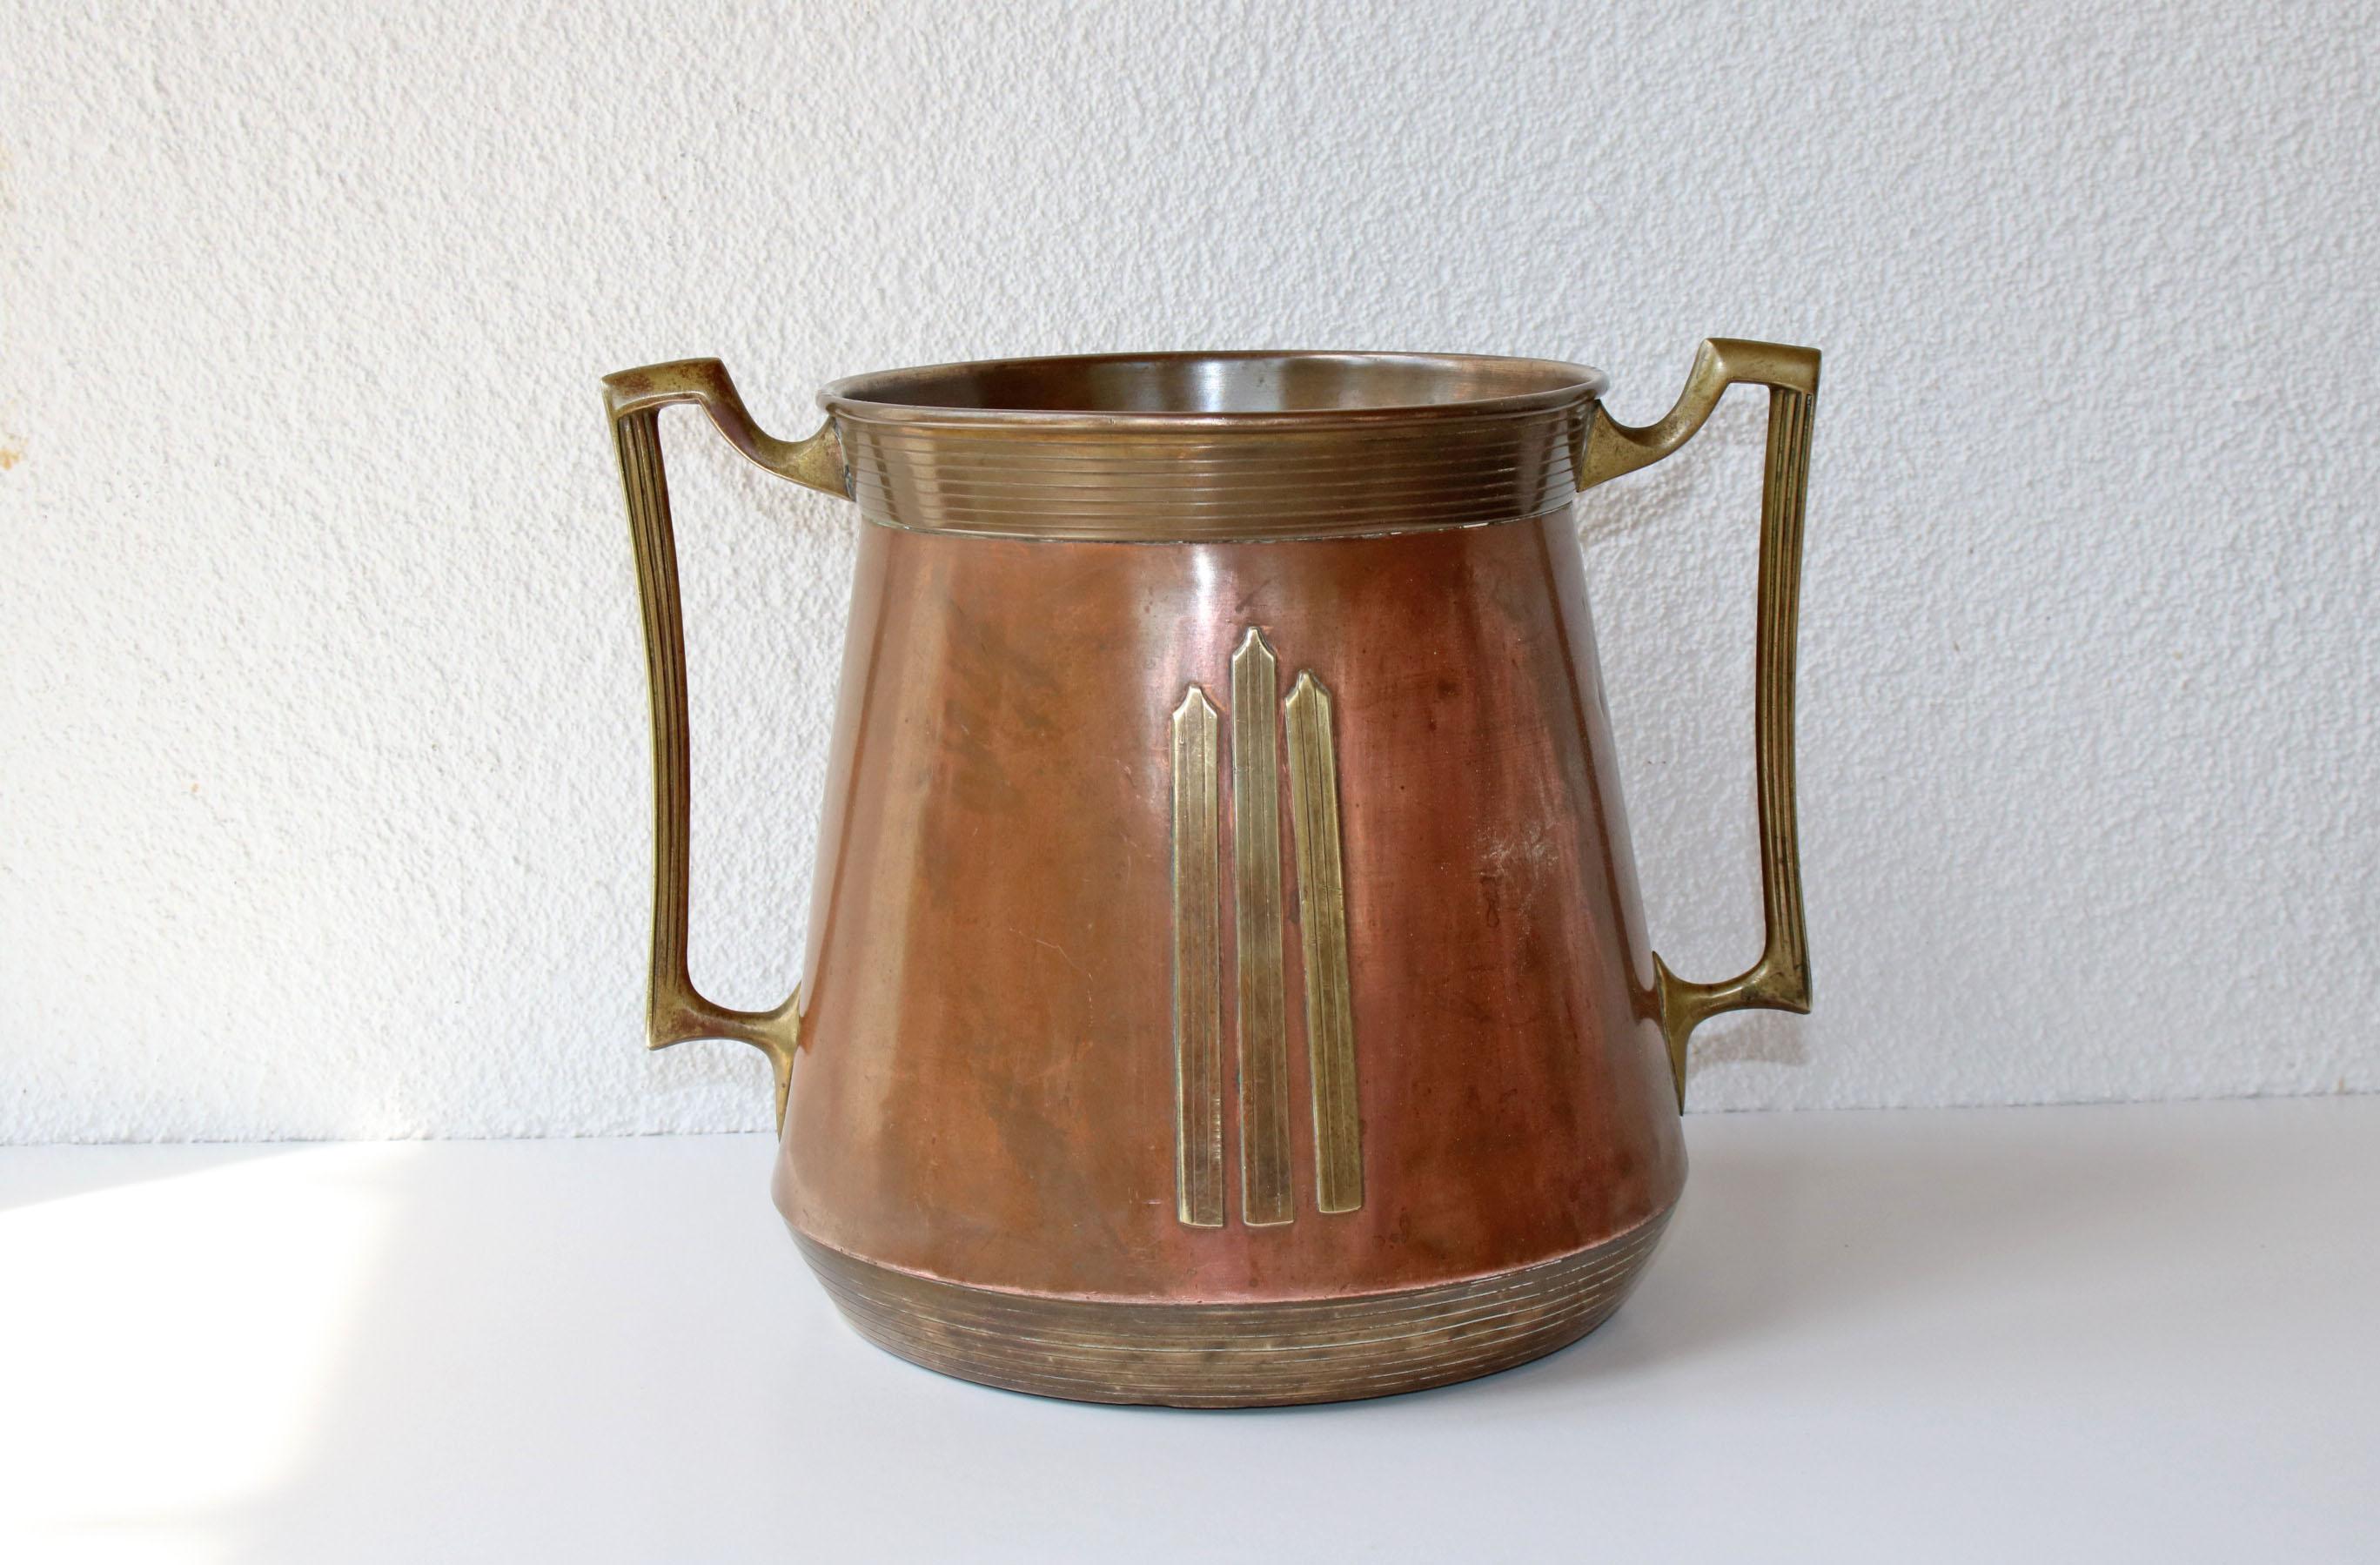 This is a beautiful copper and brass planter. It features an exquisite craftsmanship and it's beautiful shape will look great in any room. It is in original condition.